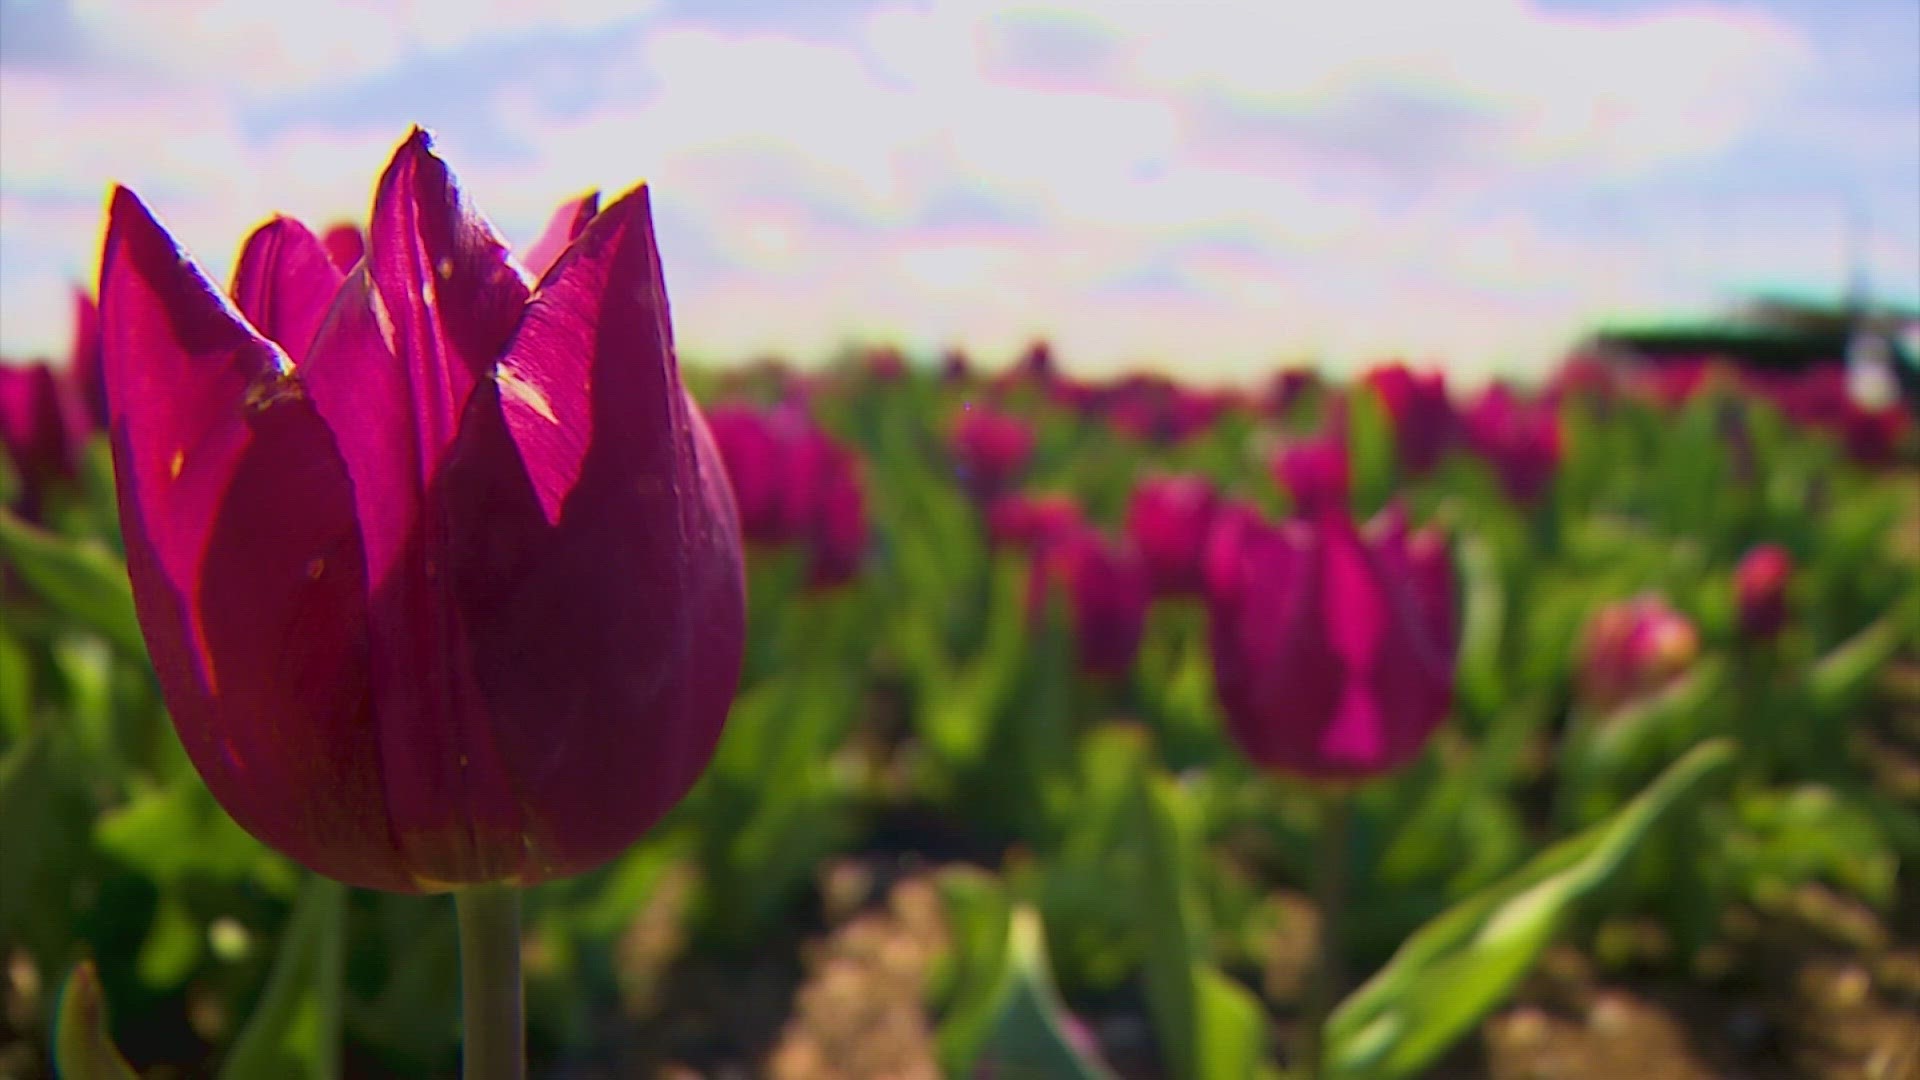 This weekend marks the start of tulip season in the Skagit Valley. The annual Tulip Festival has come on tough times since the pandemic, but hopes are high.